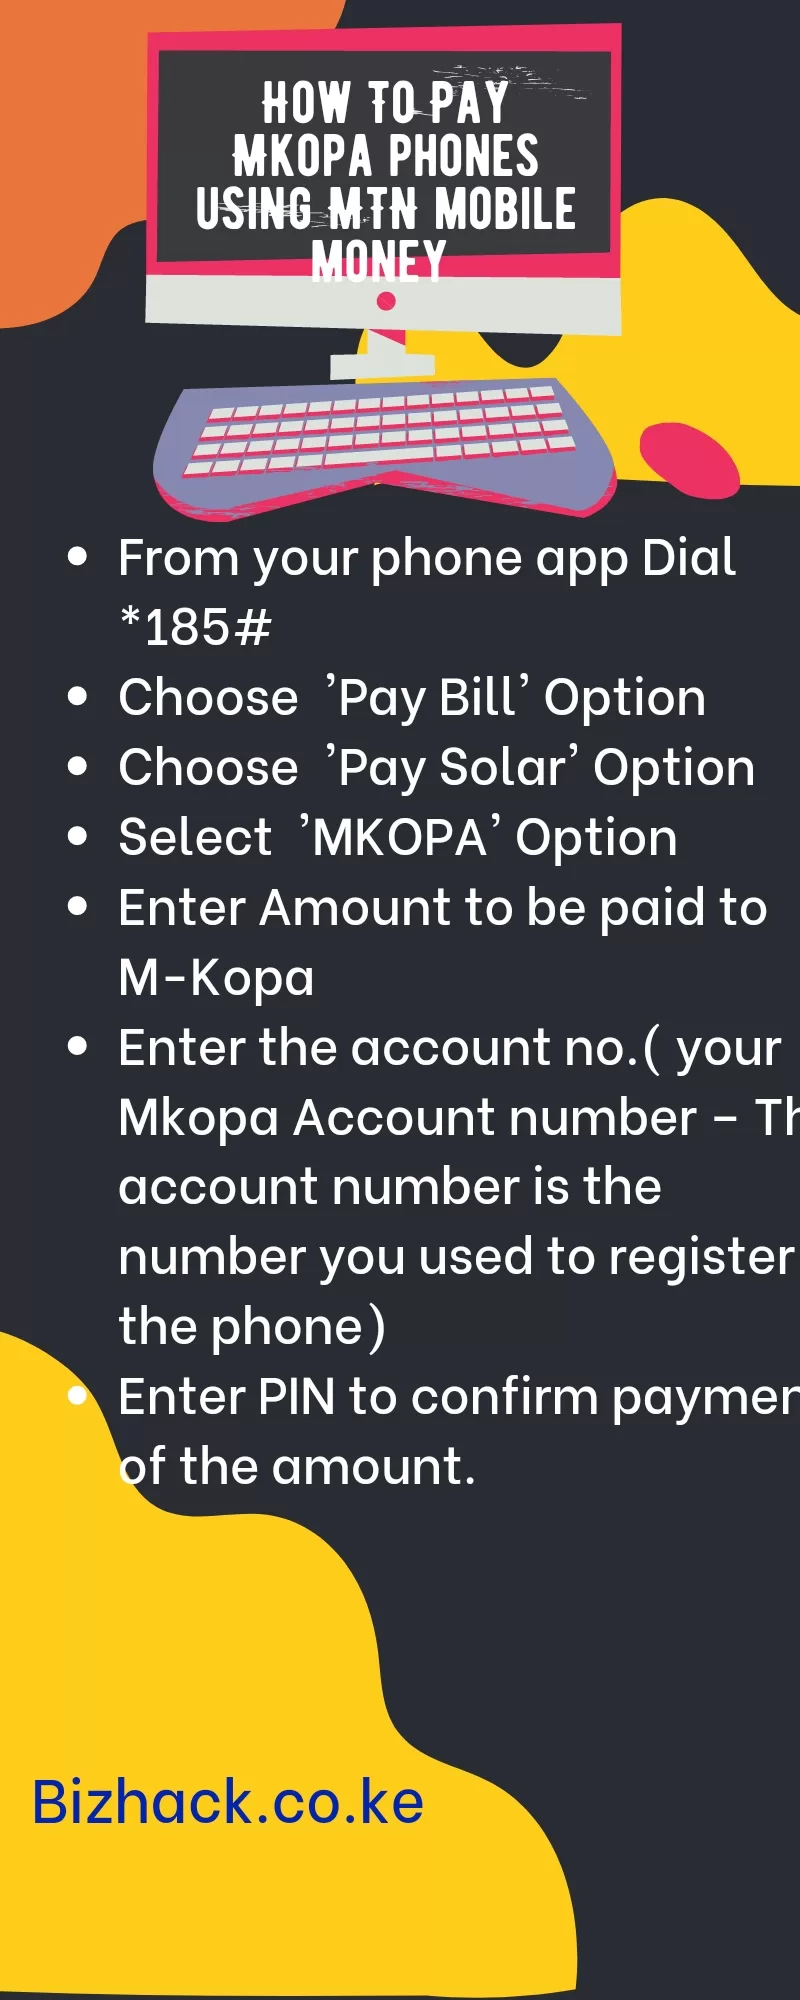 How to Pay for Mkopa phone Using Airtel Money